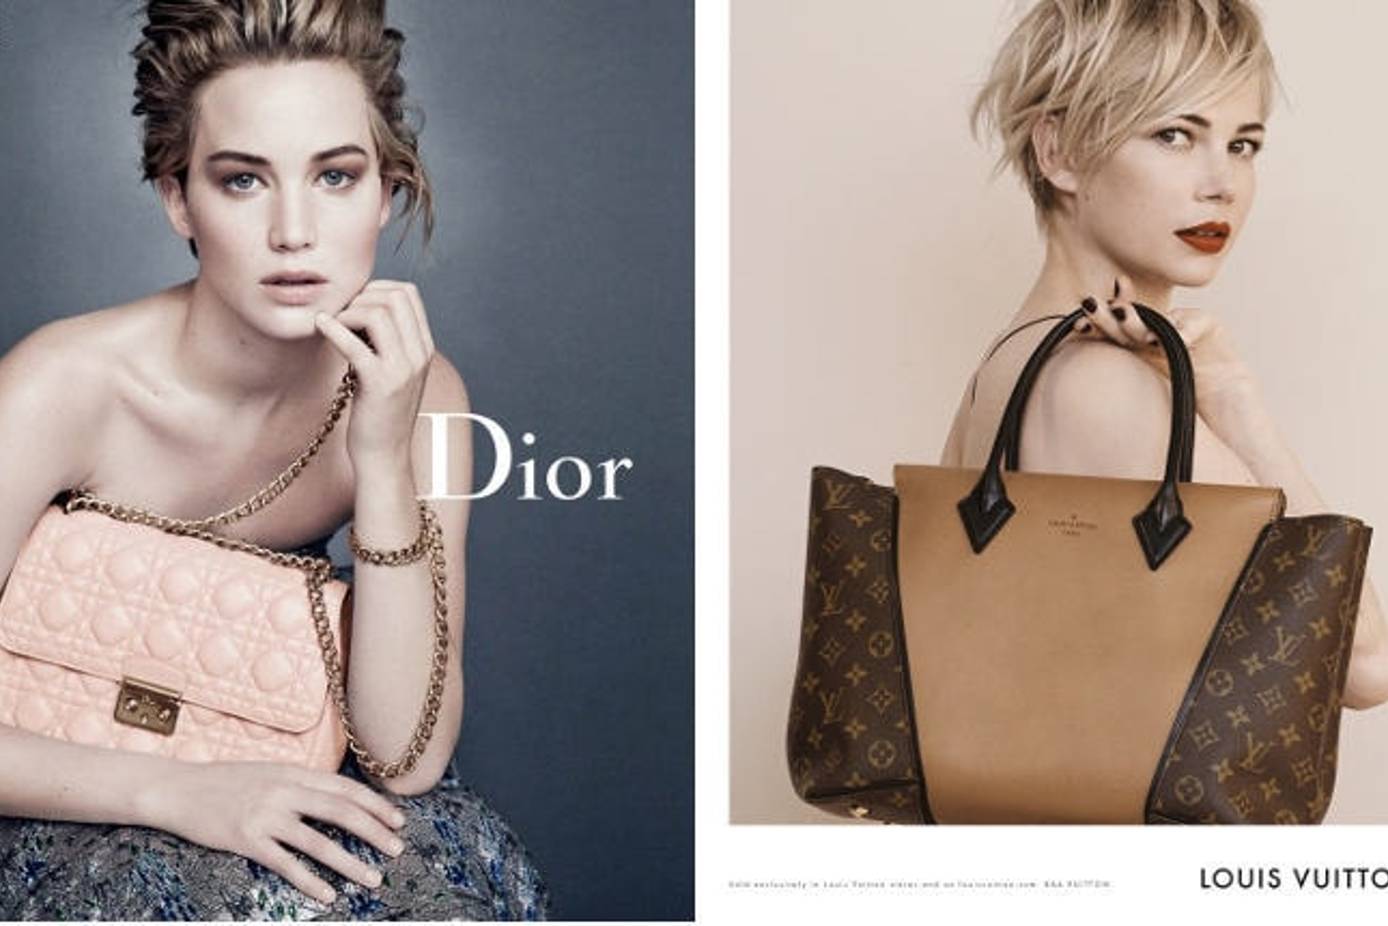 Christian Dior, haute couture and ready-to-wear - Fashion & Leather Goods -  LVMH